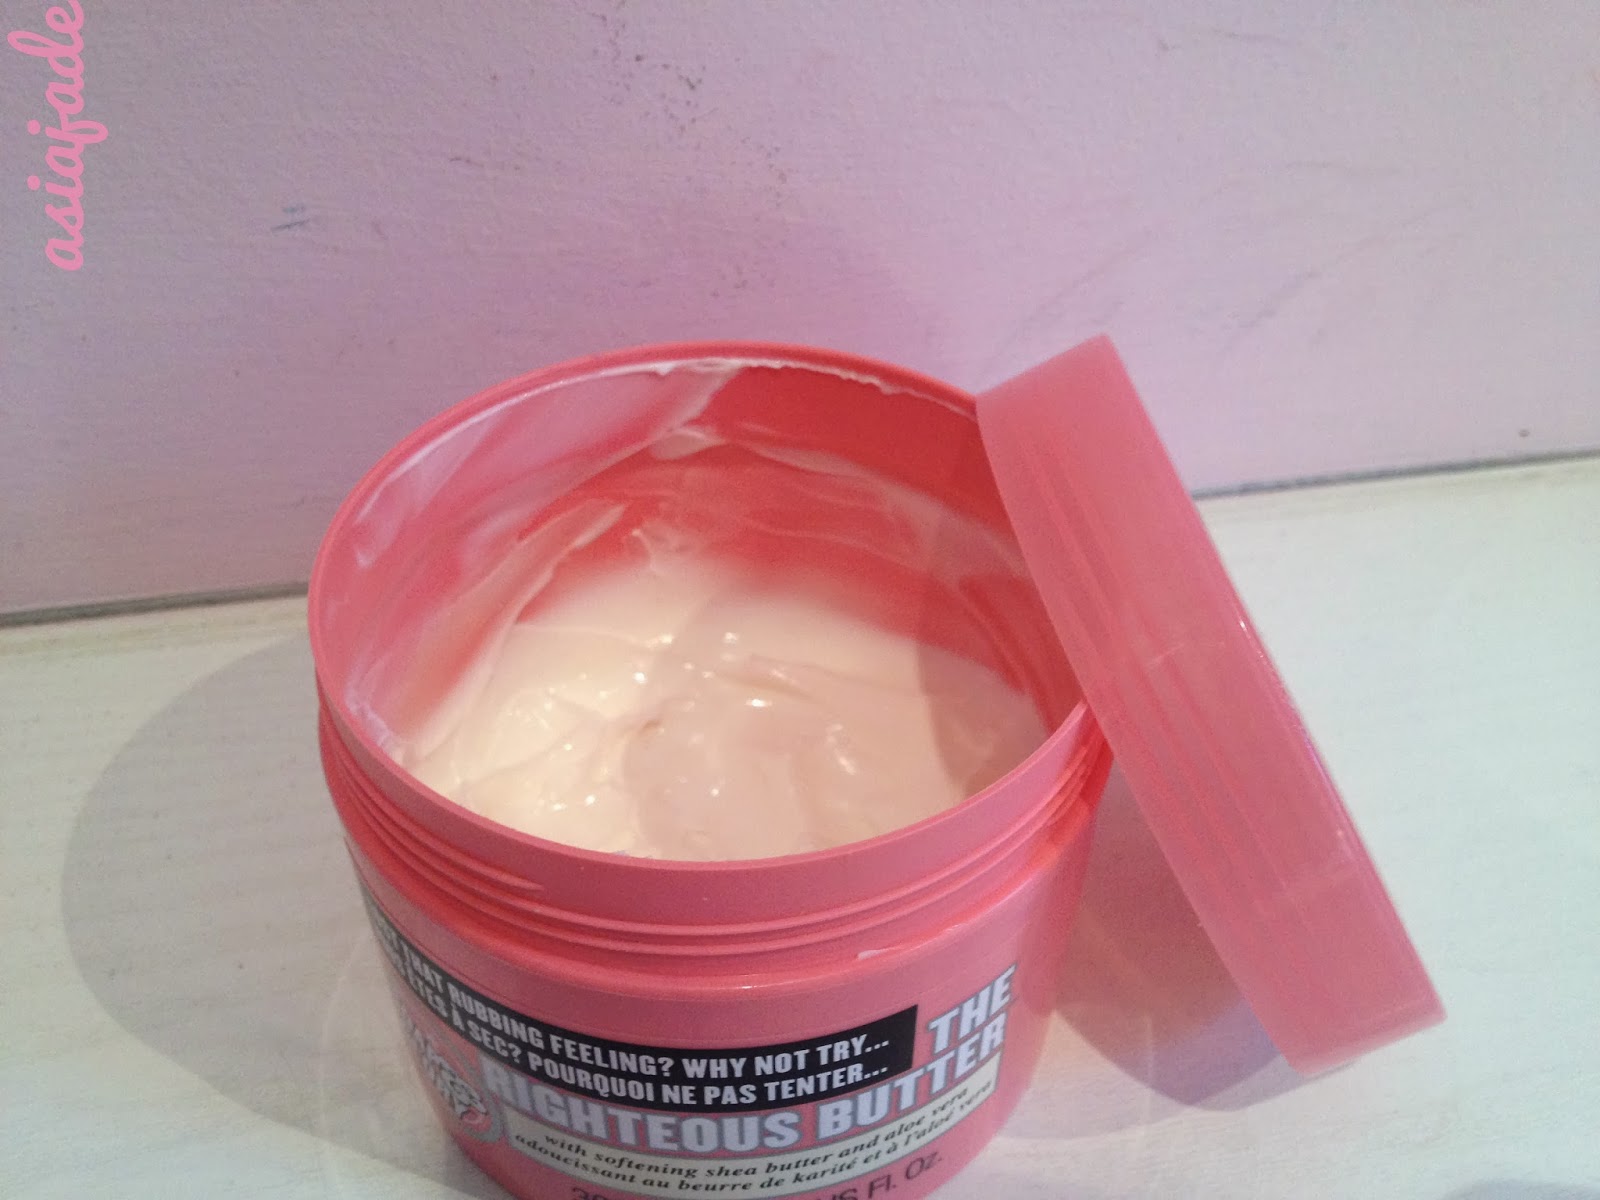 Soap and Glory The Righteous Butter review